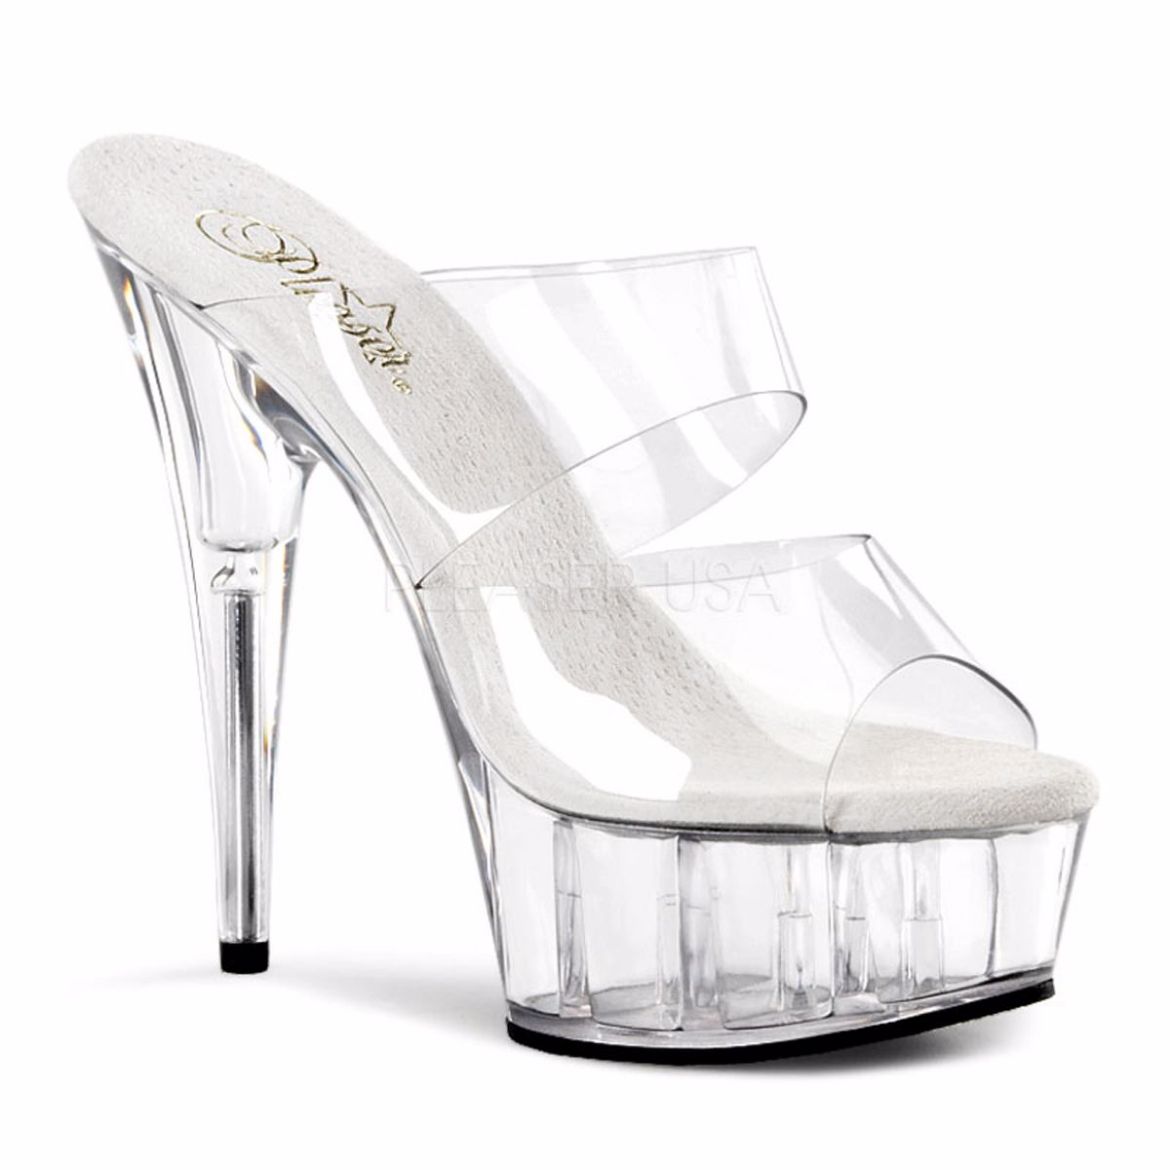 Product image of Pleaser Delight-602 Clear/Clear, 6 inch (15.2 cm) Heel, 1 3/4 inch (4.4 cm) Platform Slide Mule Shoes